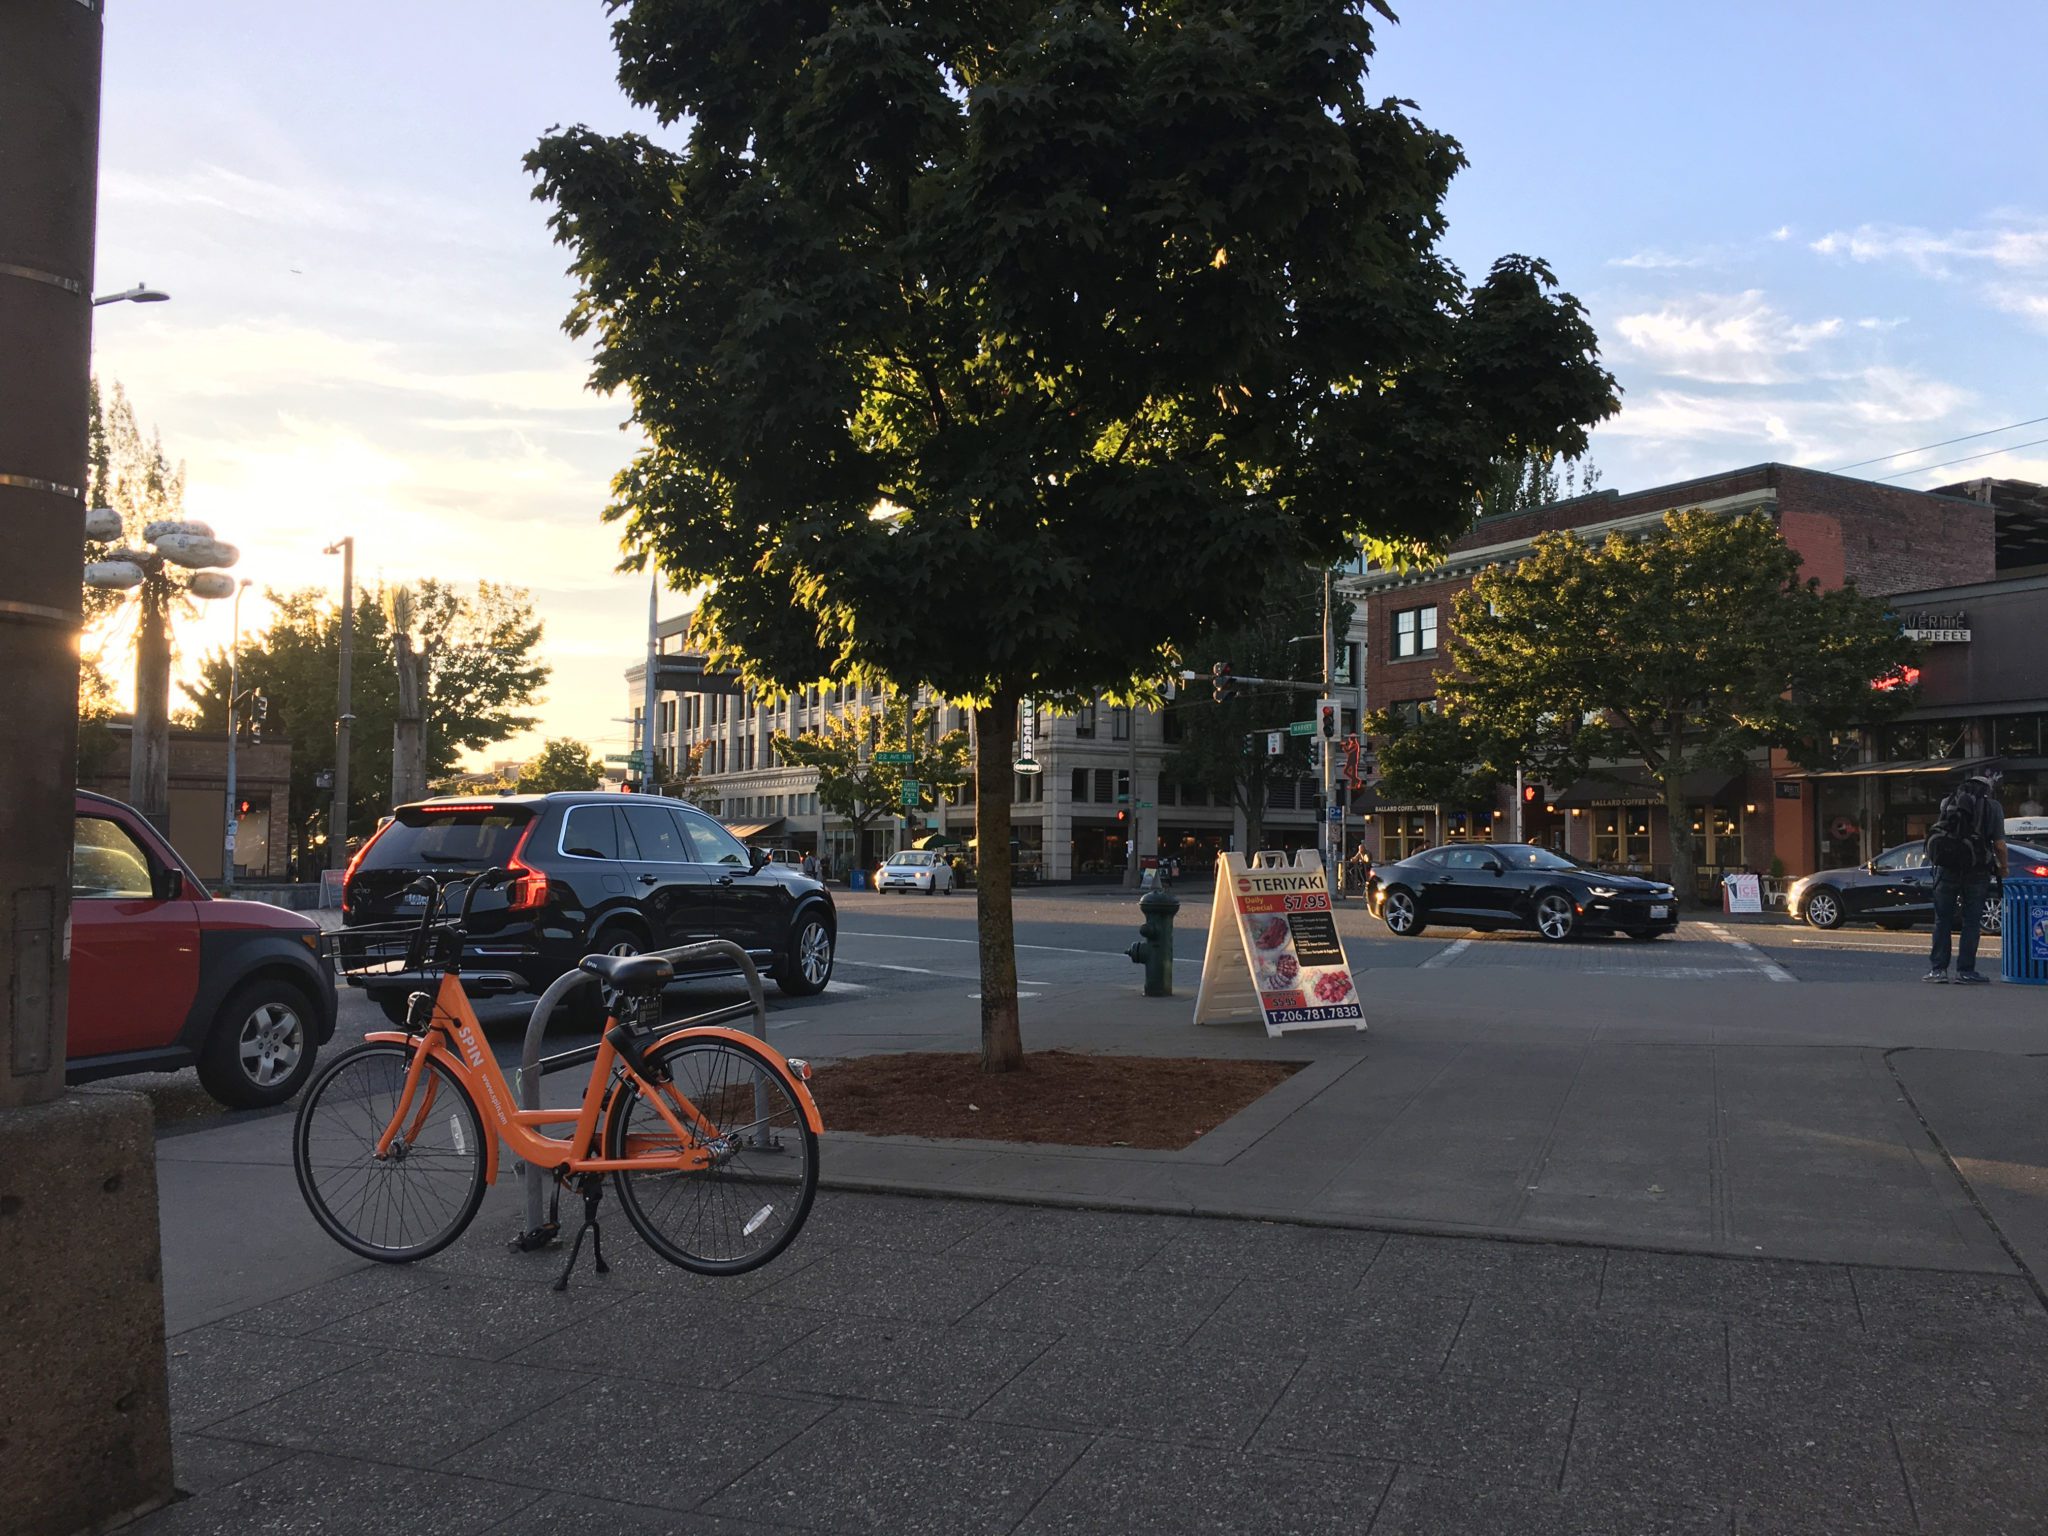 An orange bike share bicycle is properly parked on the sidewalk in Seattle's Ballard neighborhood. The bicycle is visible in the lower left corner of the image. Several buildings, cars, and a large tree are visible throughout the other parts of the image. The photo was taken in the evening.